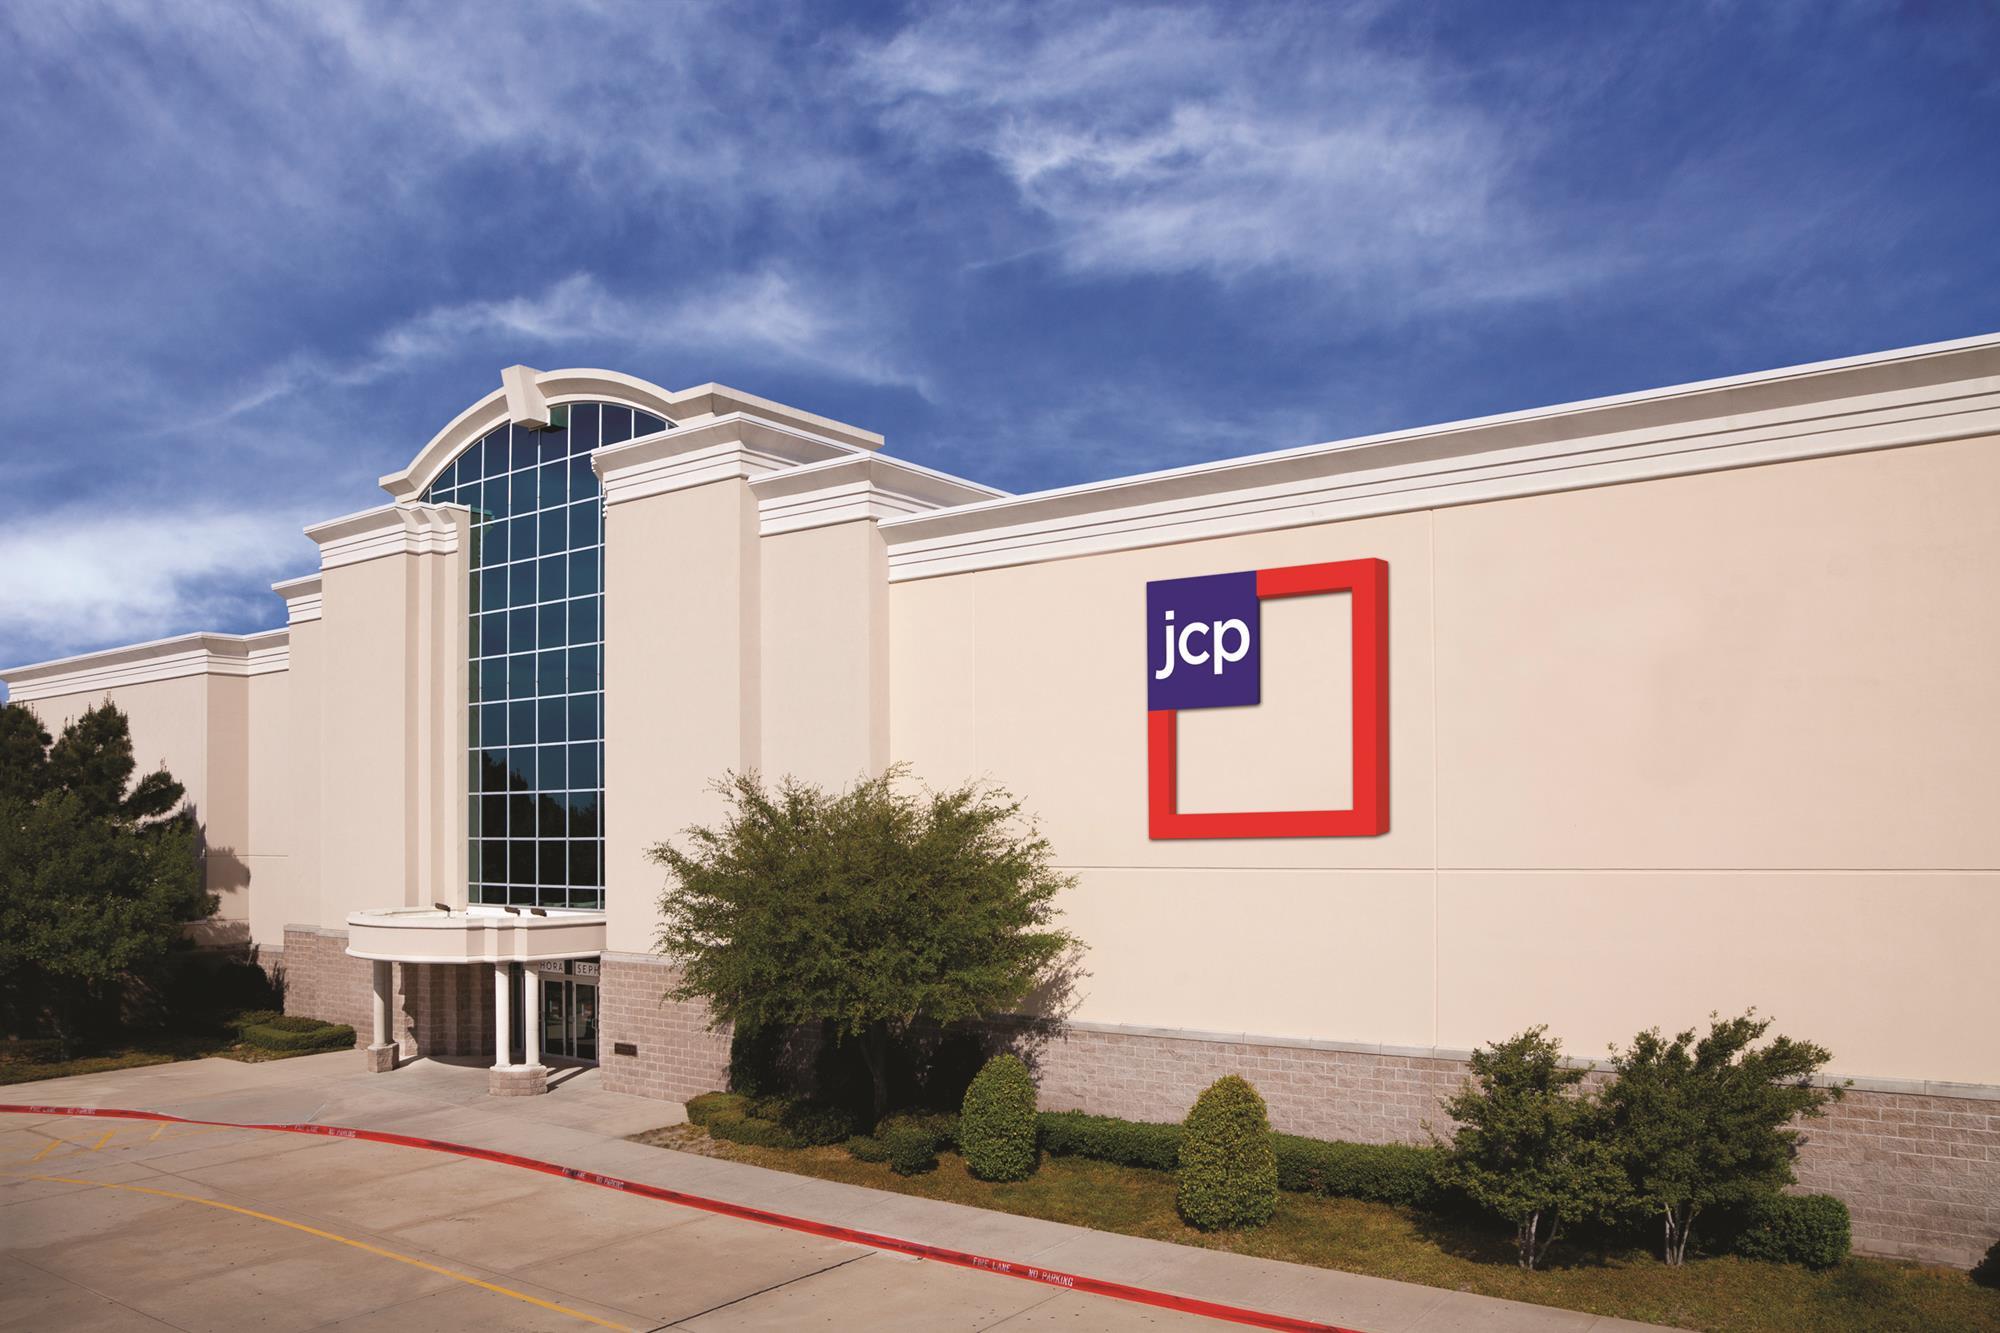 J.C. Penney's Turnaround Plan Includes a New Retail Store and Lab